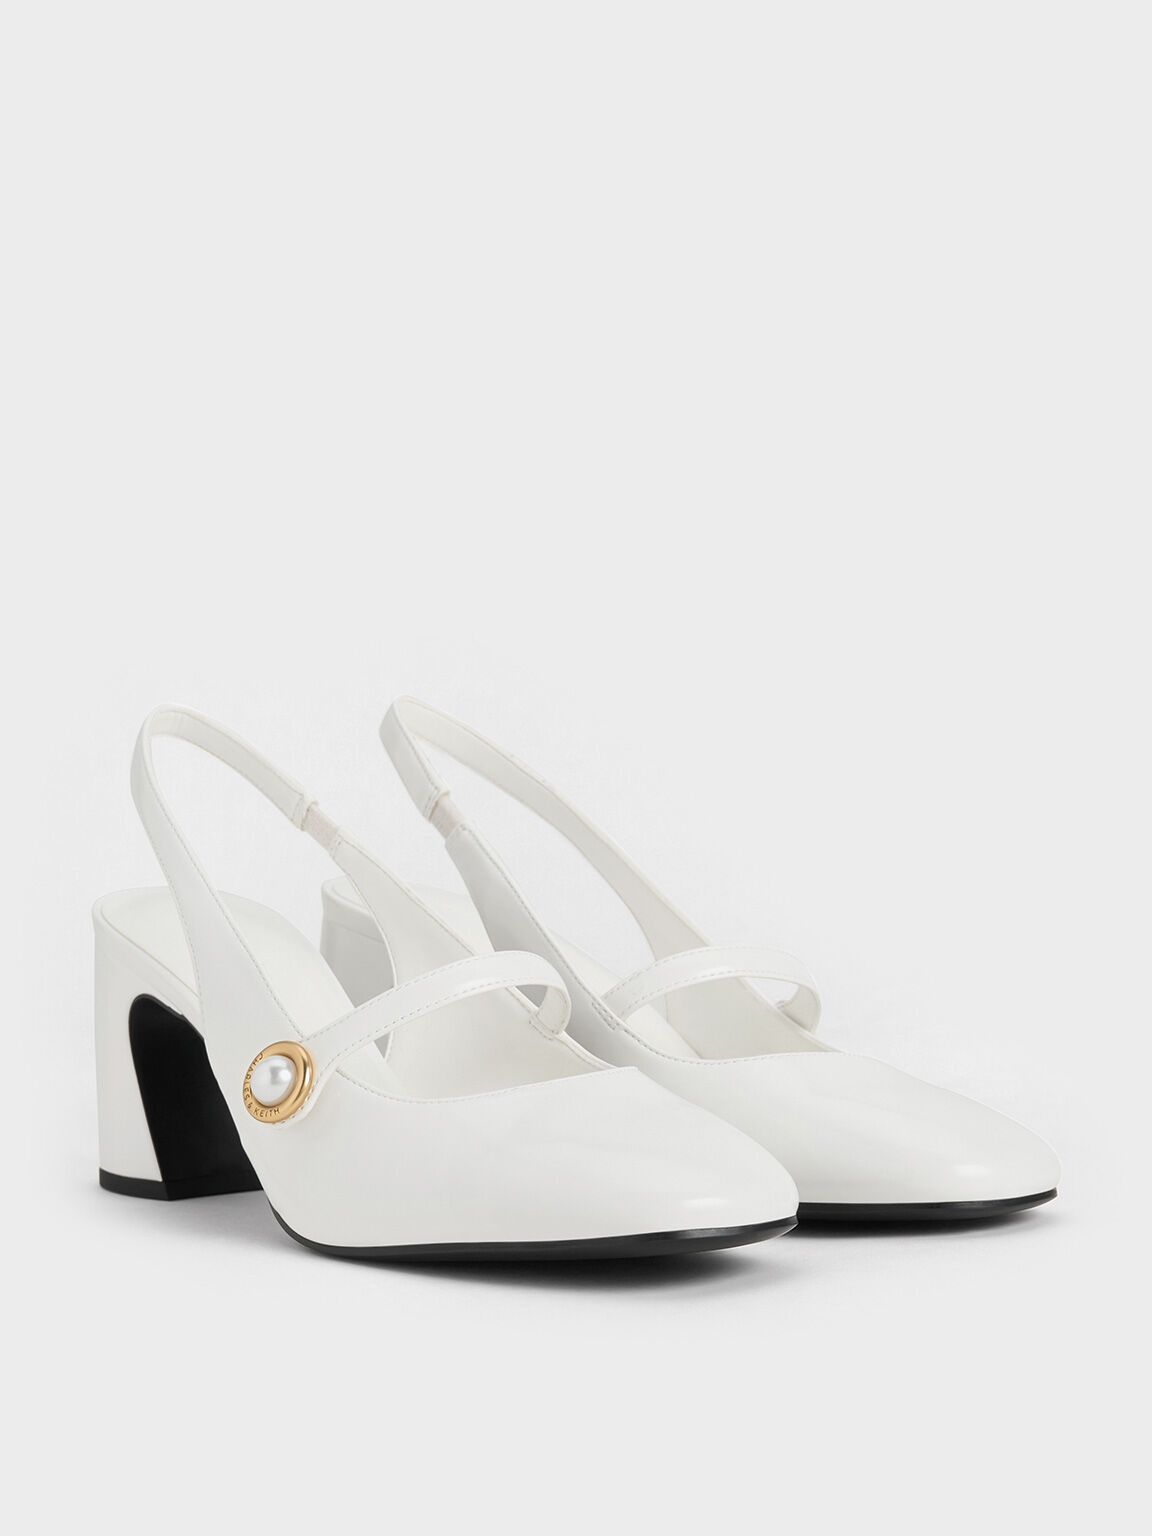 Pearl-Accent Mary Jane Pumps, White, hi-res